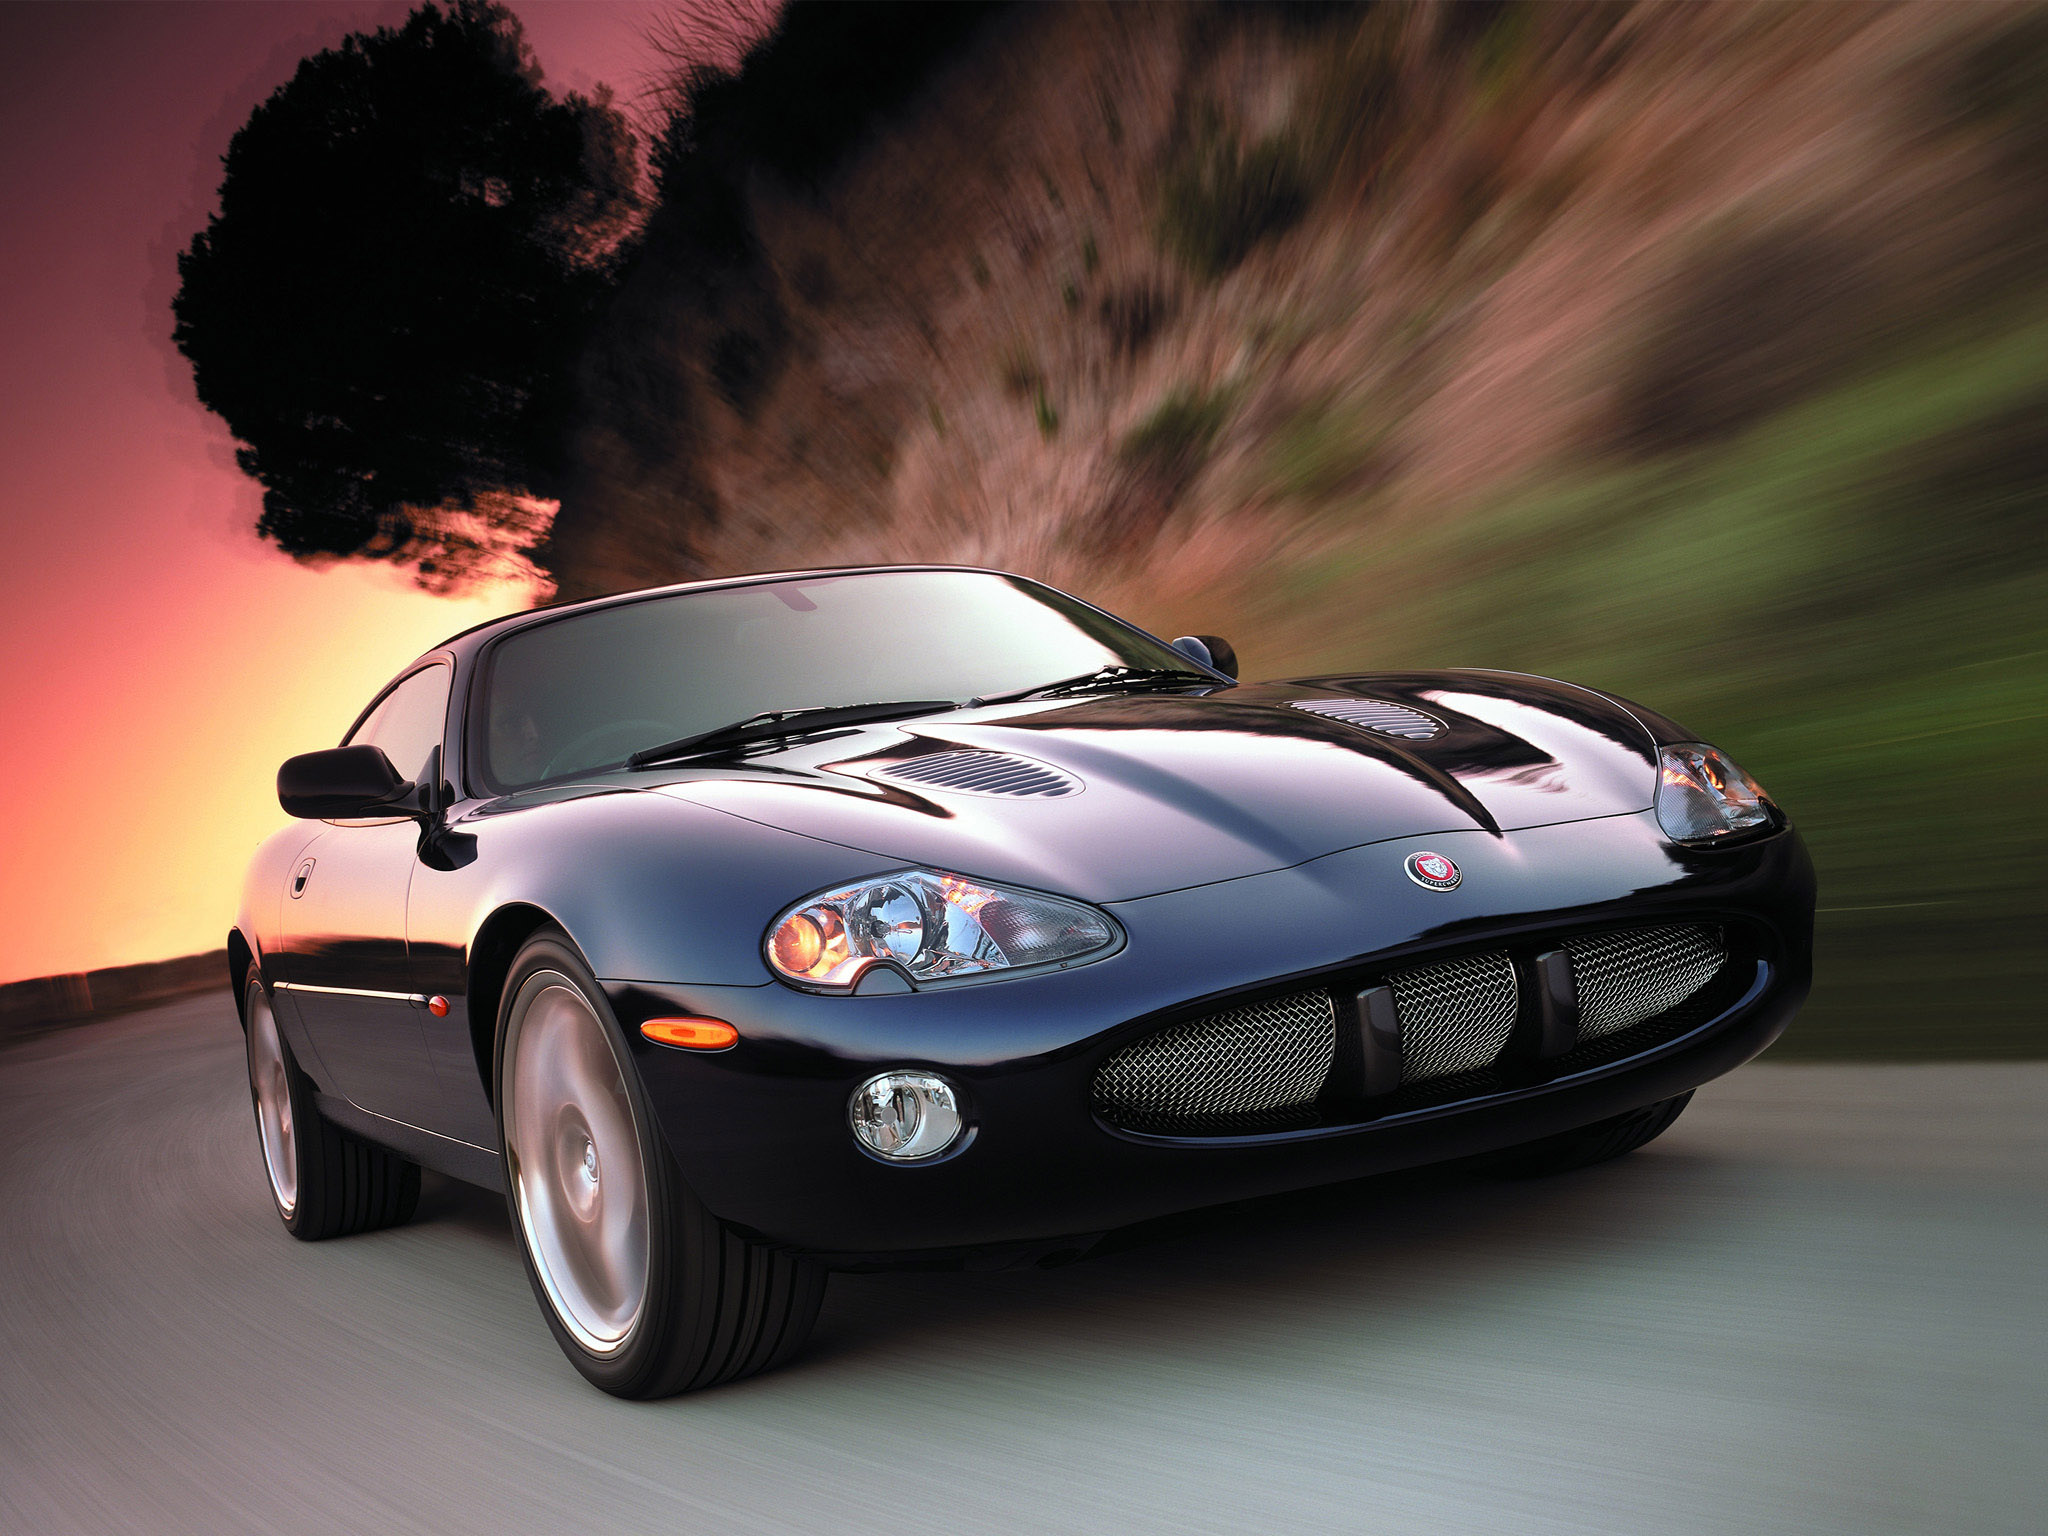 1998 Jaguar XKR coupé is one of many cheap cars that will get you laid